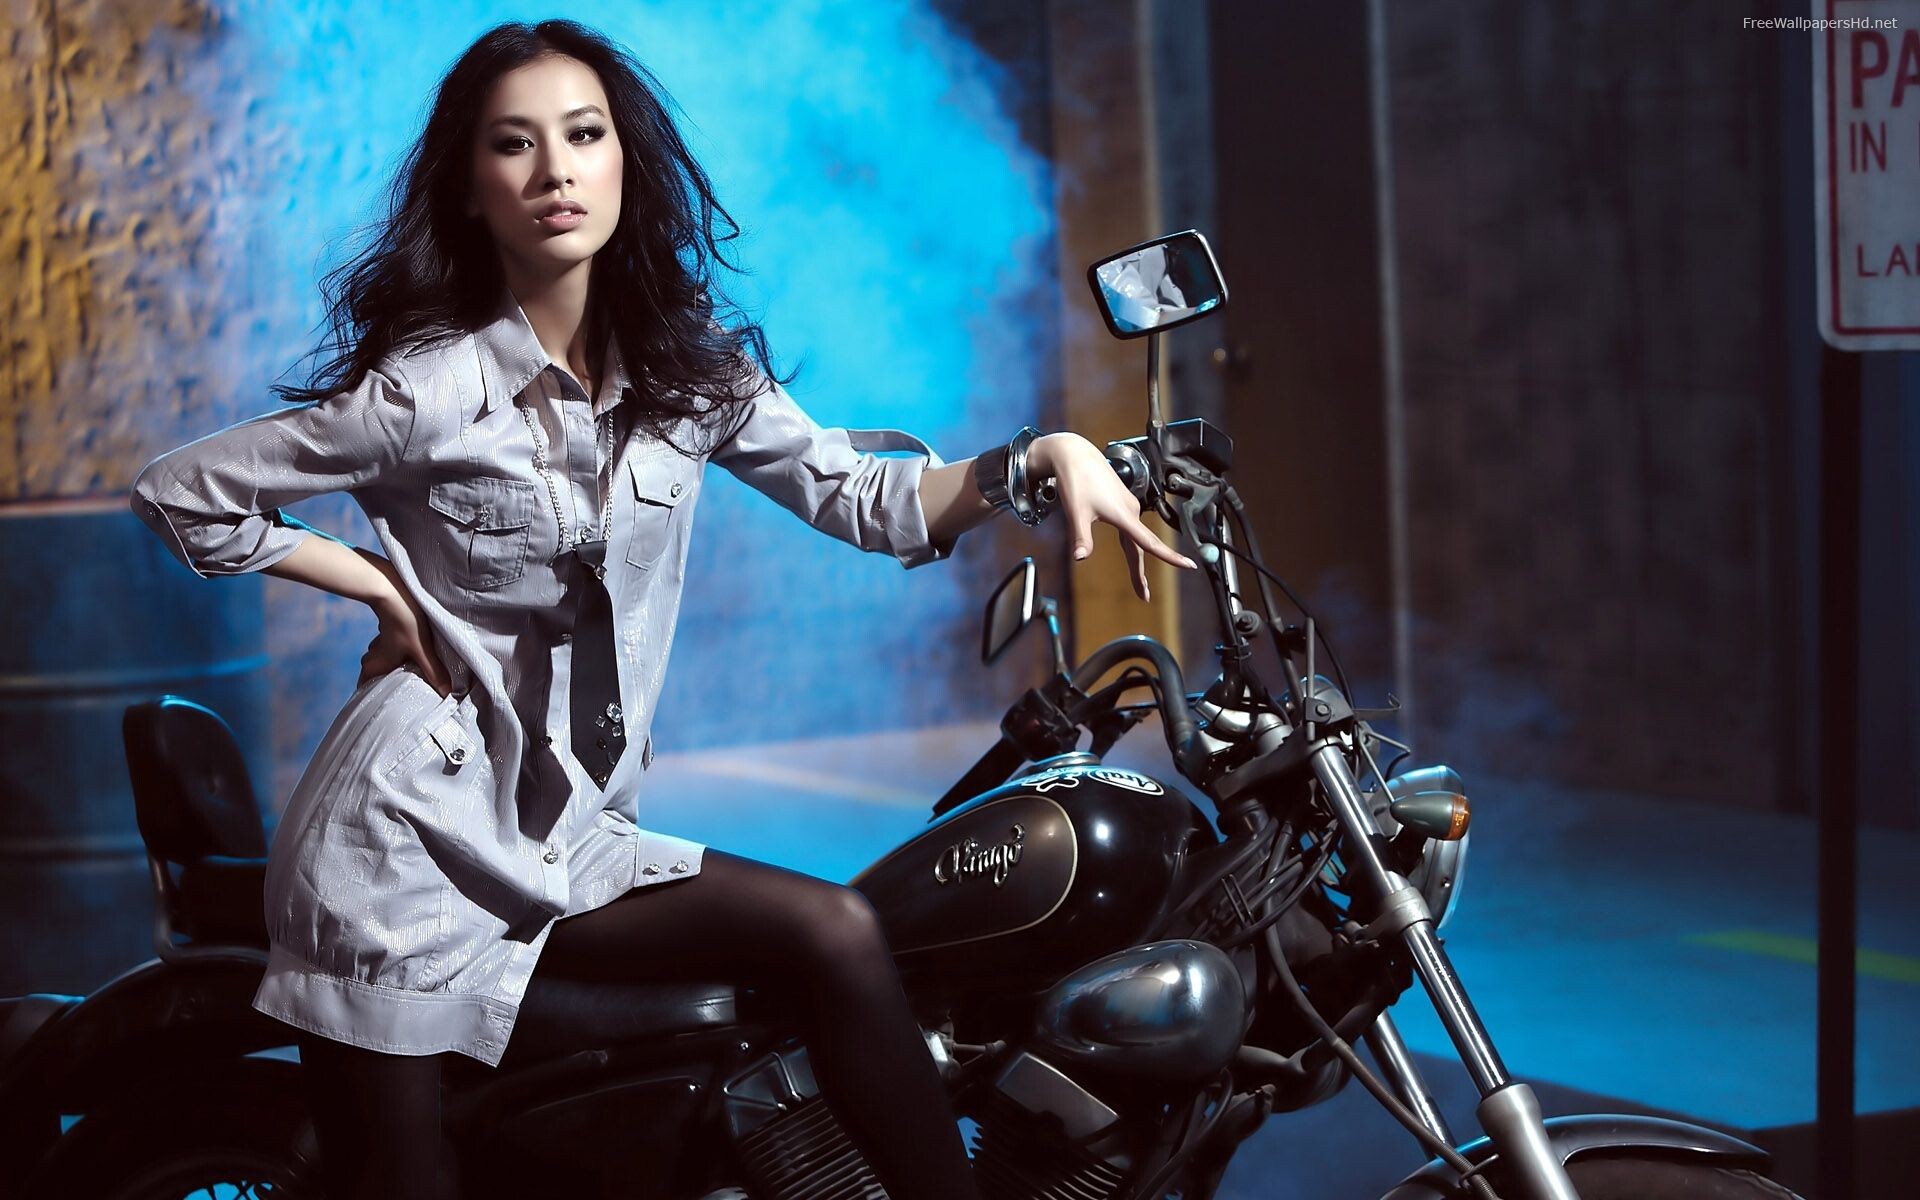 Girls and Motorcycles: Moto Kingo, Motorbikes that are more suitable for female bikers, A daily commuter bike. 1920x1200 HD Wallpaper.